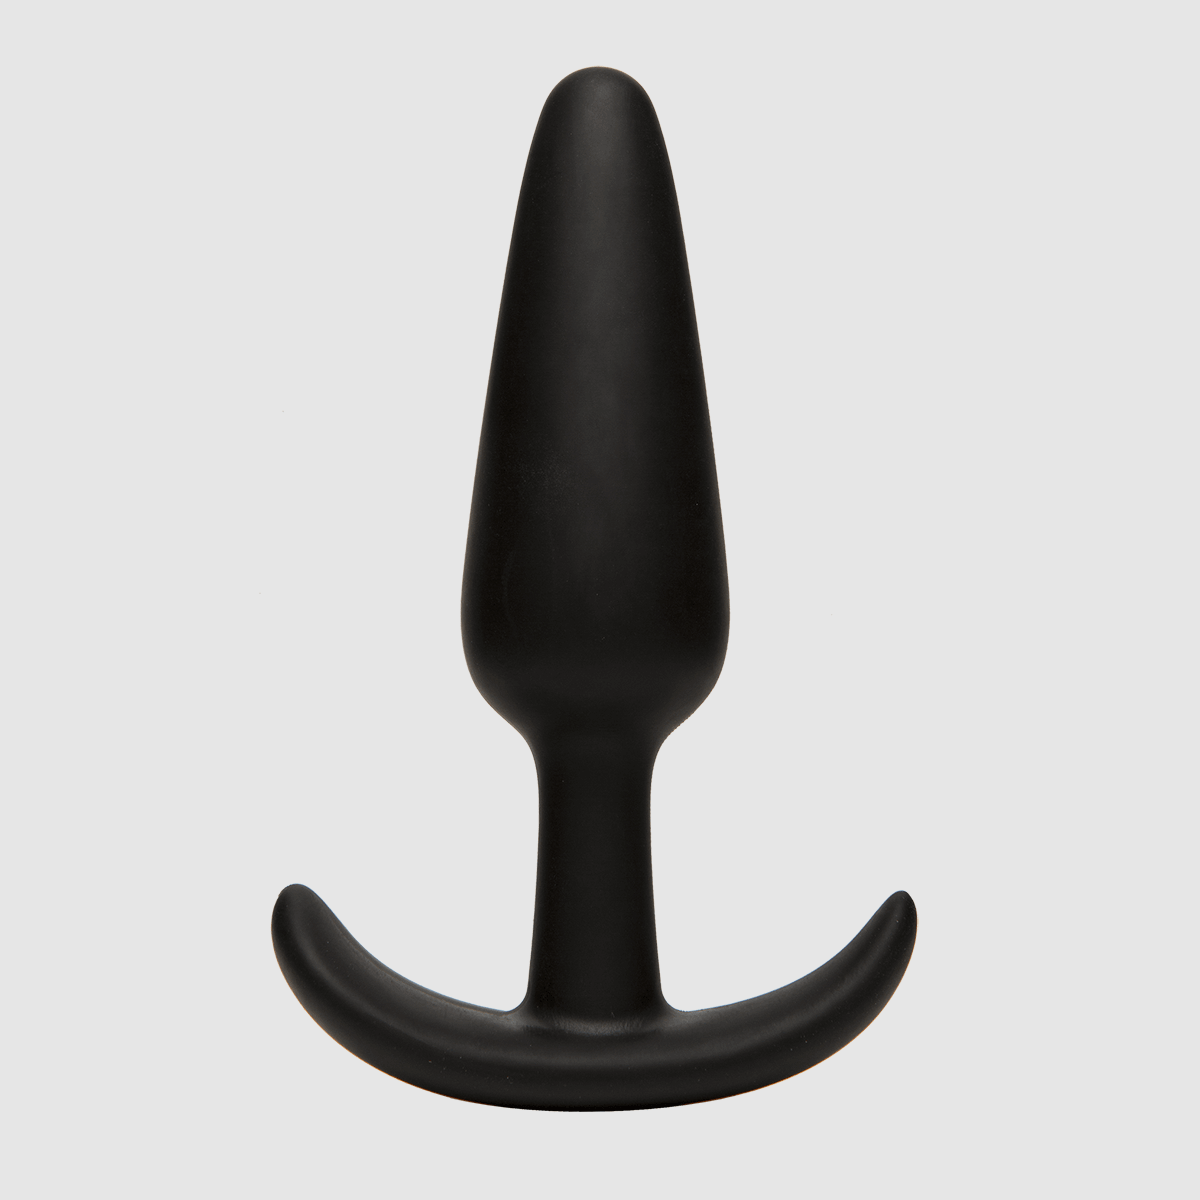 Mood Naughty 1 X-Large Tapered Plug - Black - Thorn & Feather Sex Toy Canada